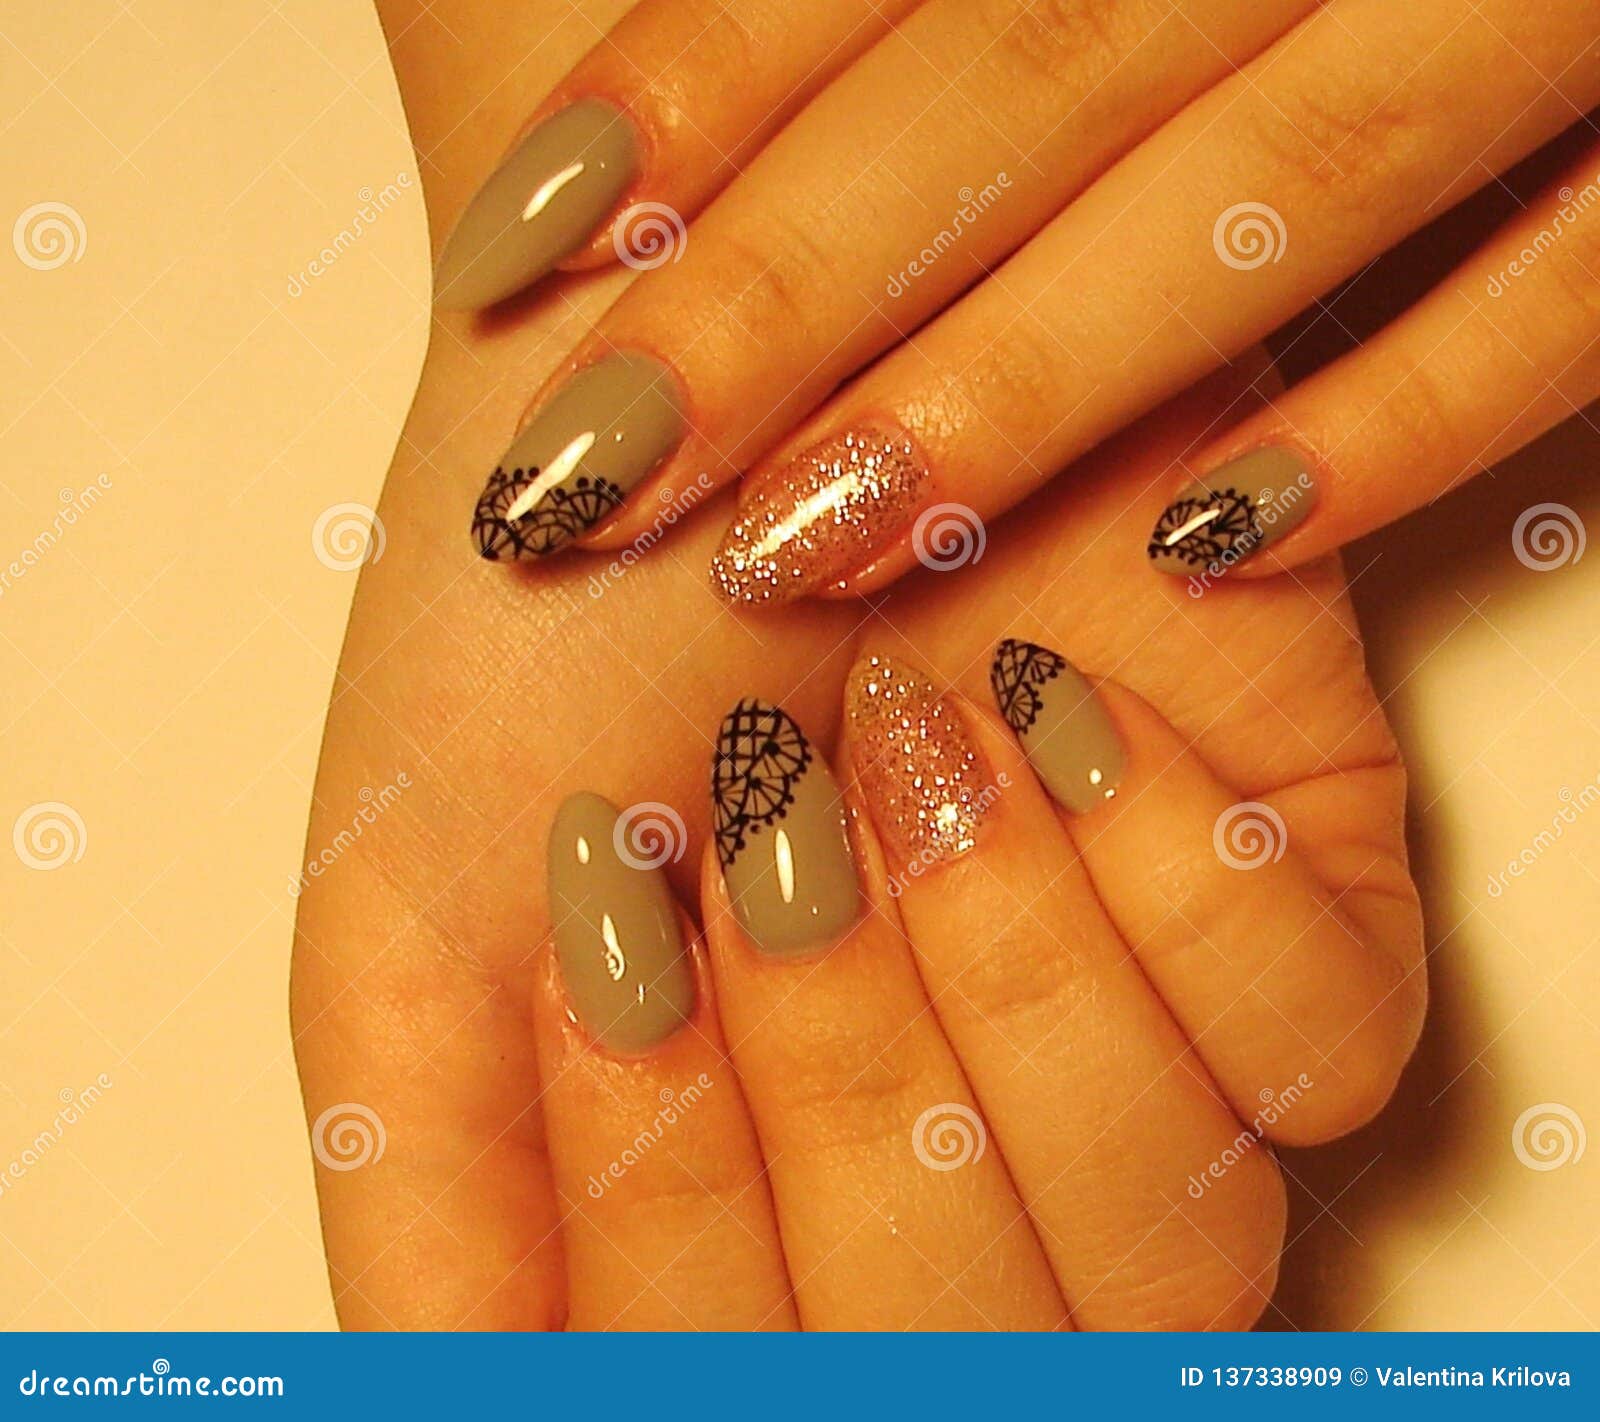 Nail Art & Nail Extension at best price in Ghaziabad